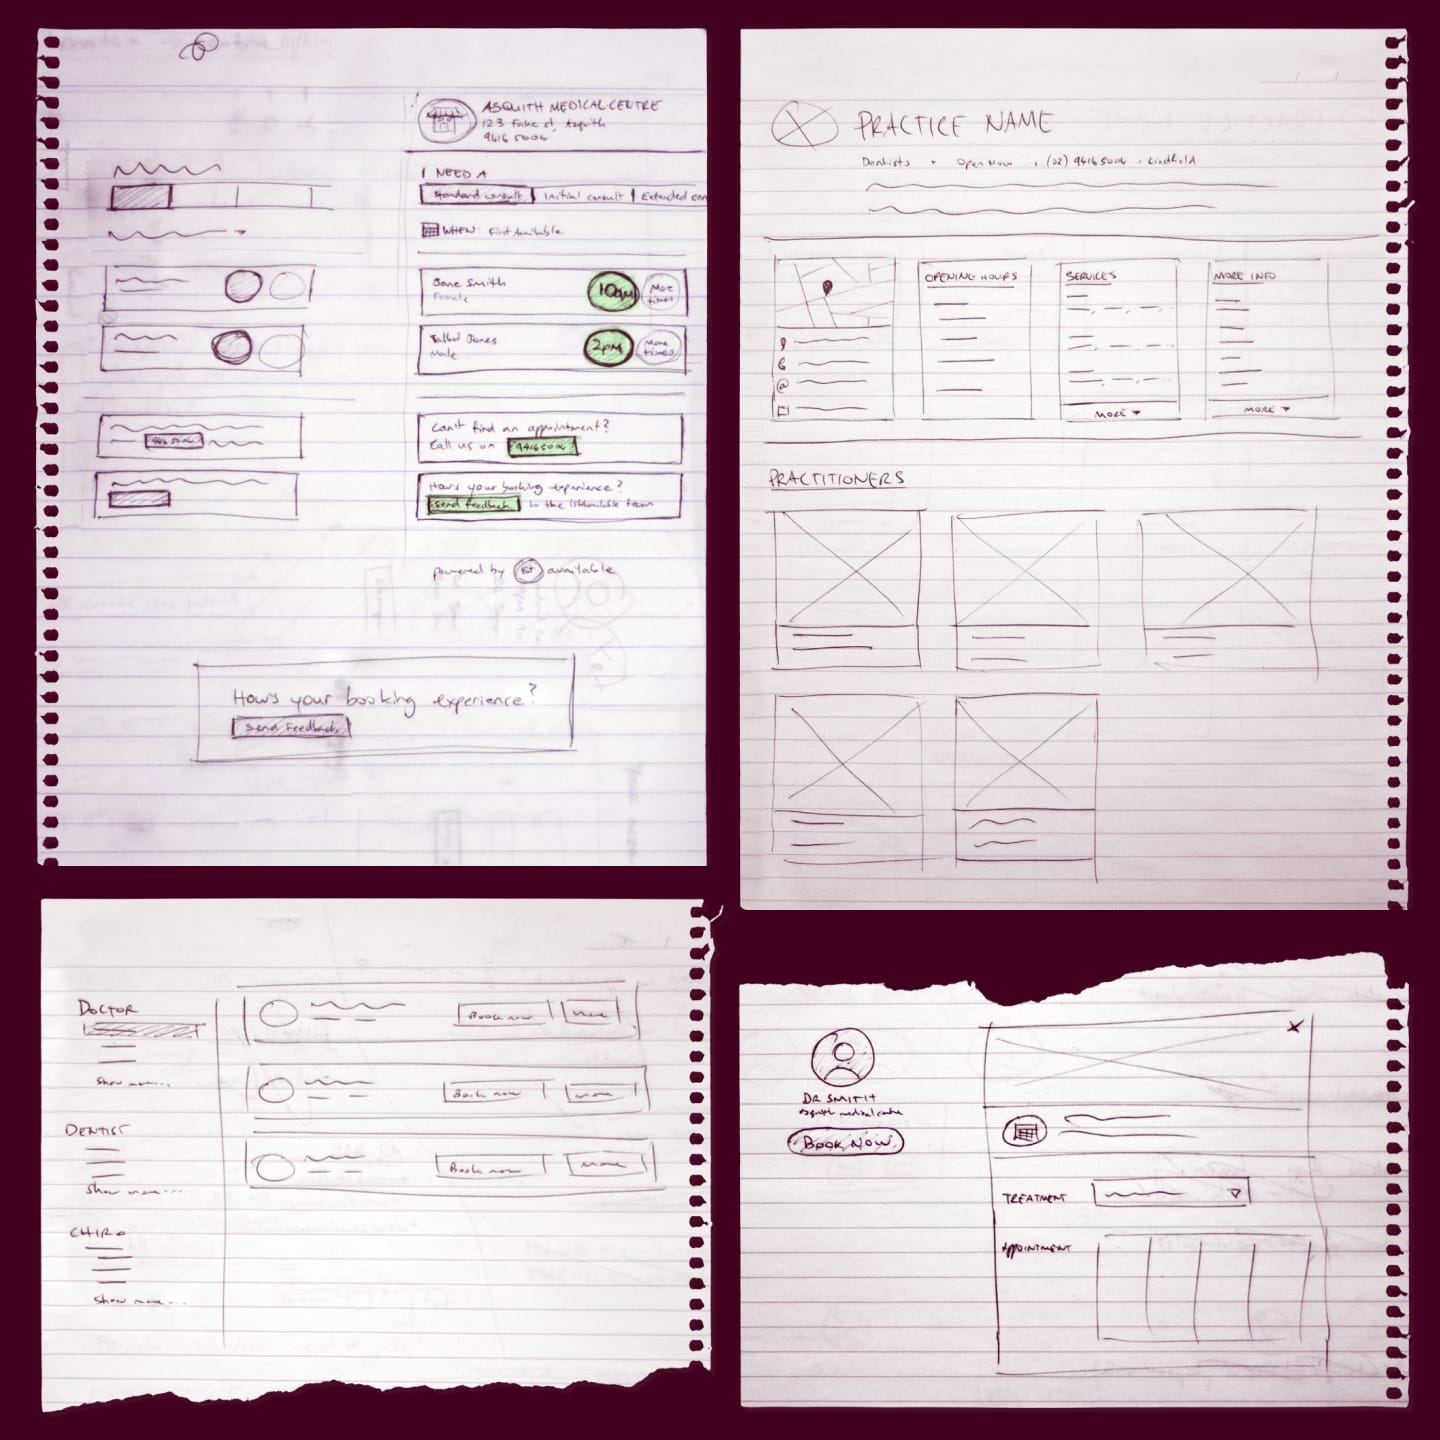 Some quick early wireframes I sketched during the concepting phase of the project